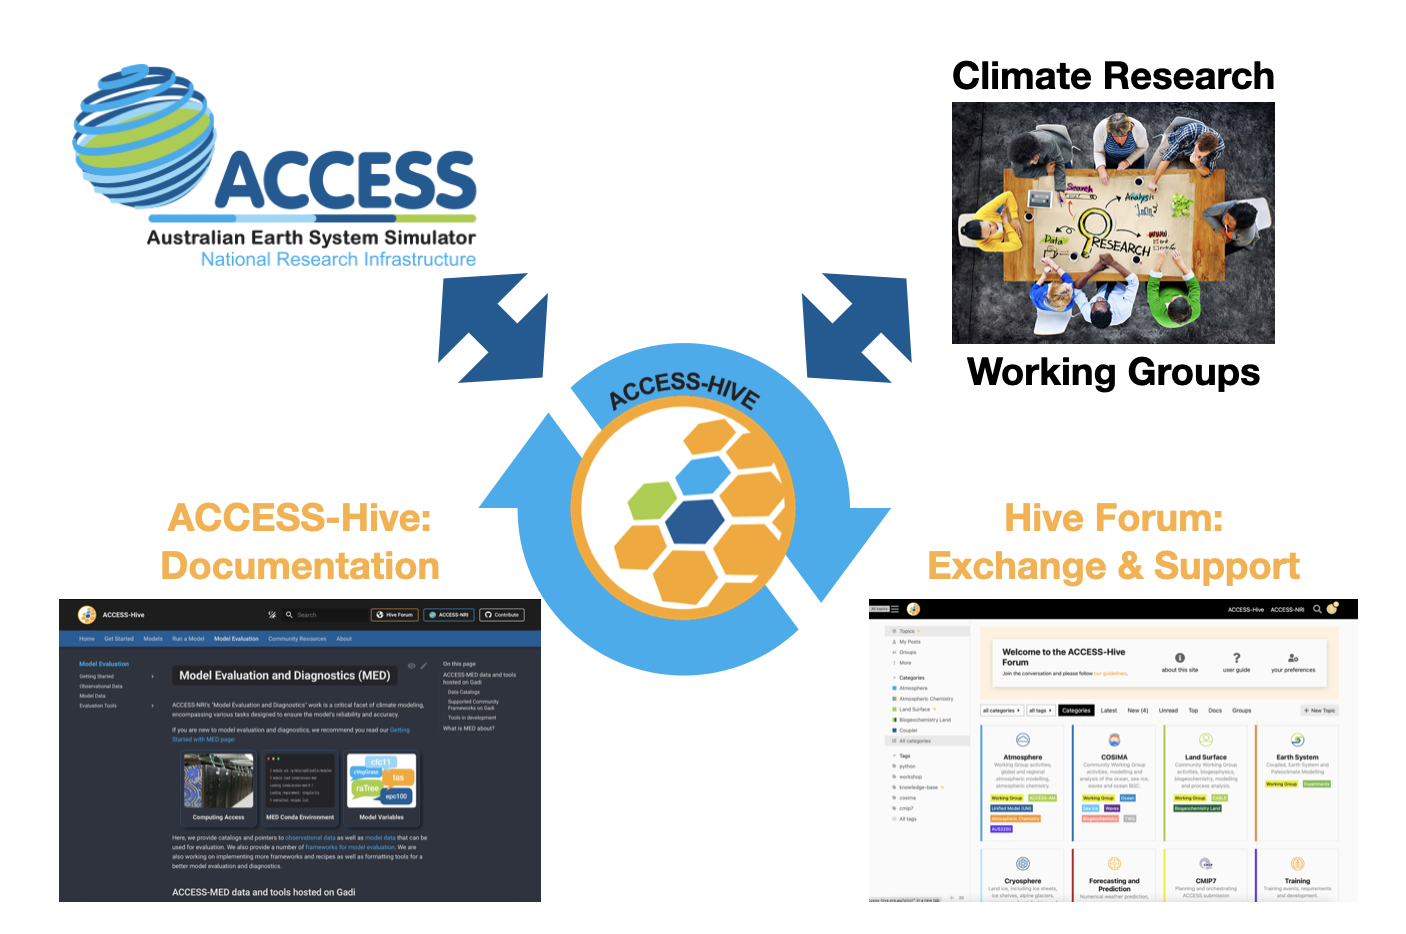 Diagram showing how ACCESS-NRI and the Climate Research Working Groups engage with each other through the ACCESS-Hive via the Access-Hive portal for documentation and the Hive Forum for exchange and support.